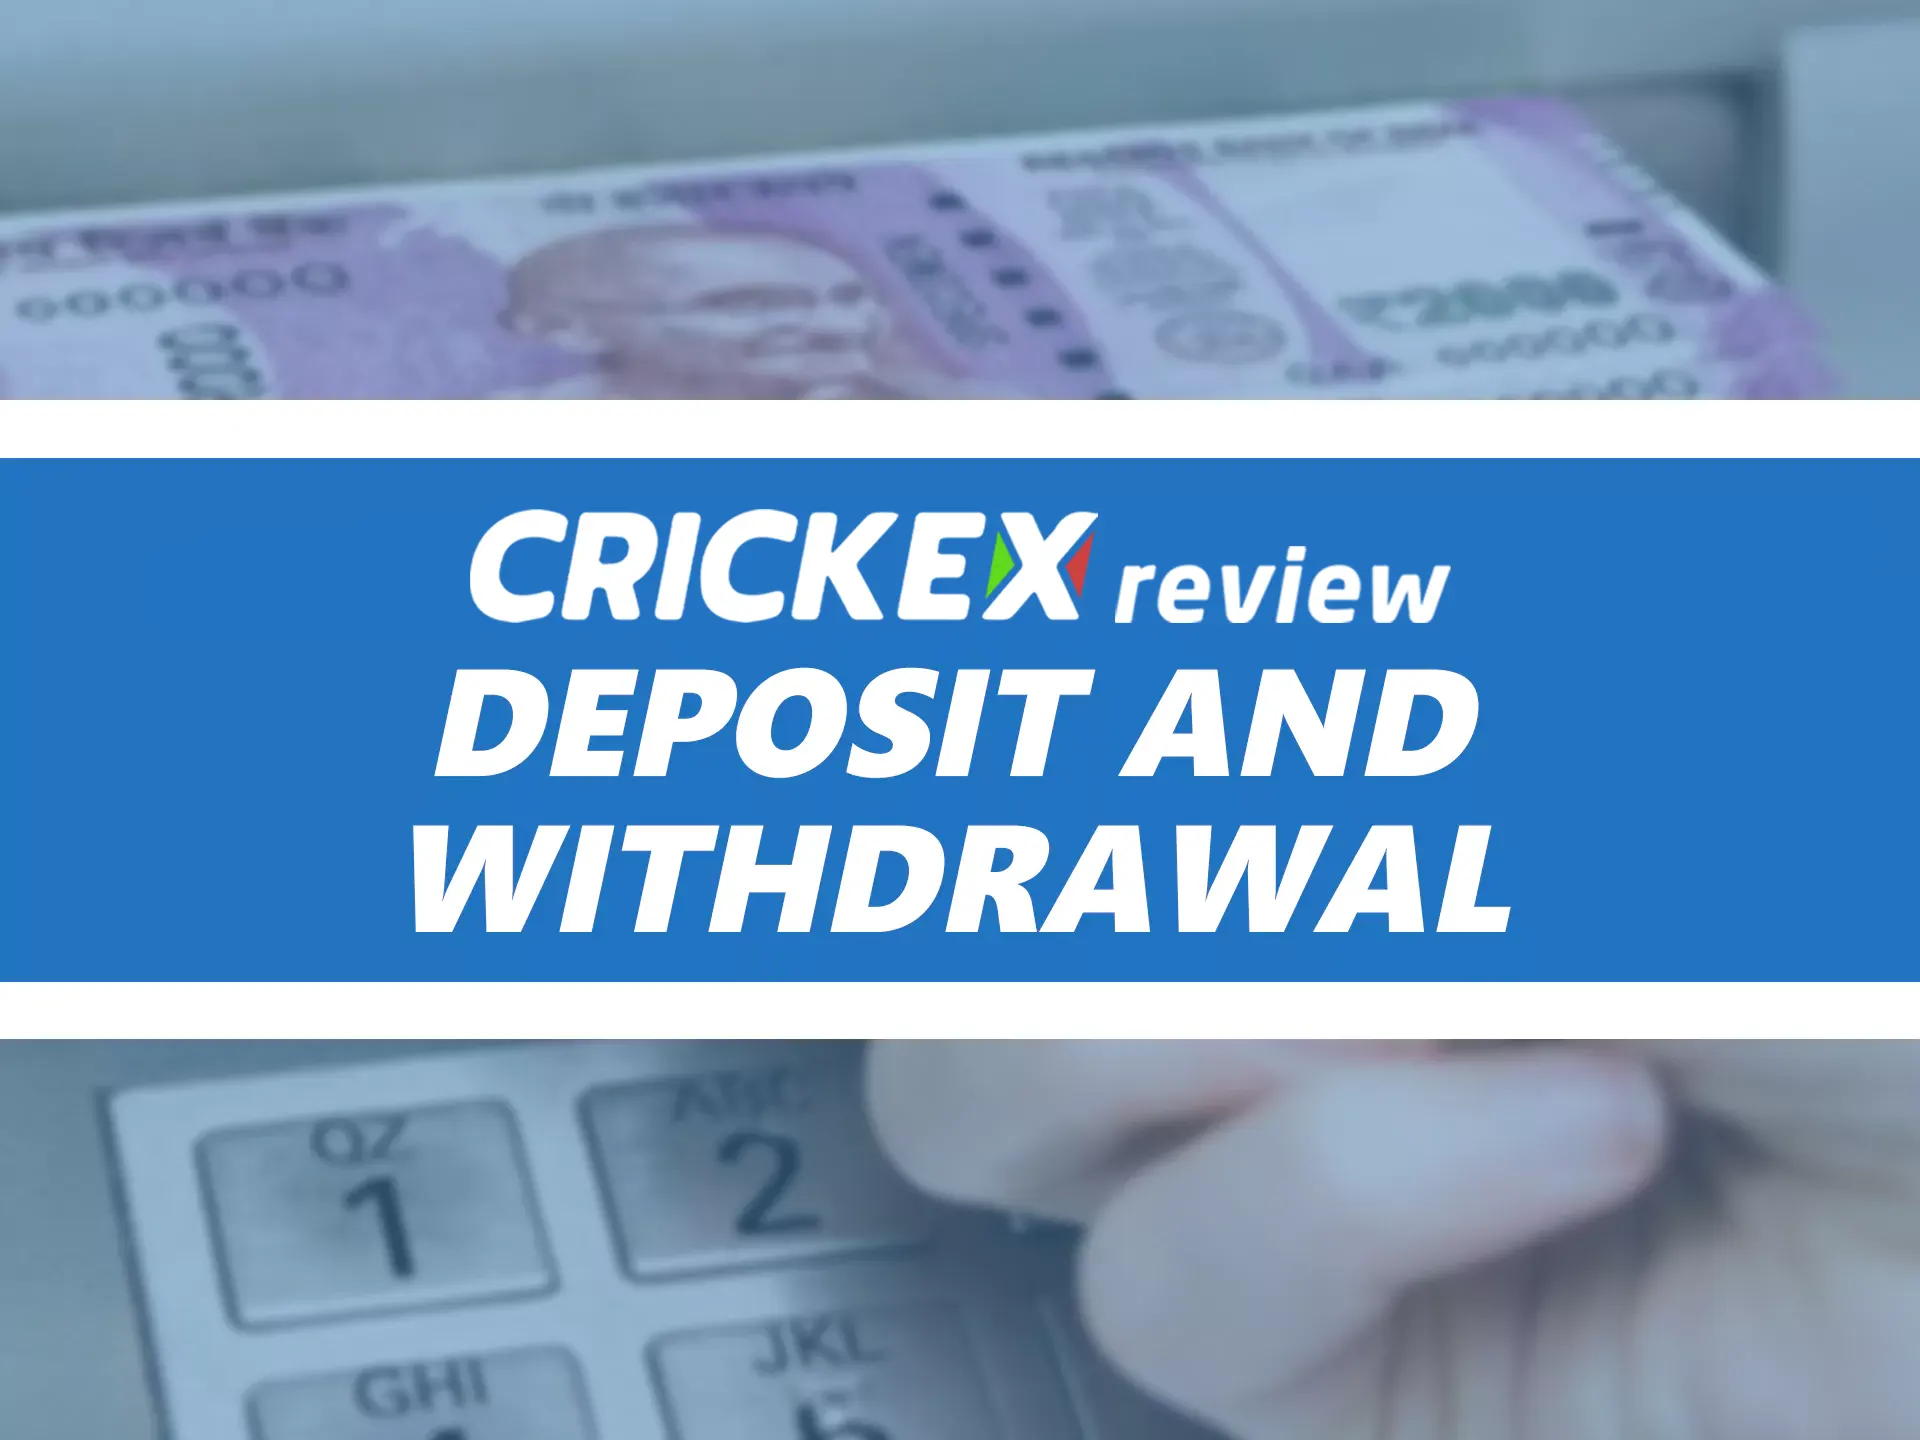 Crickex allows you to deposit and withdraw money.